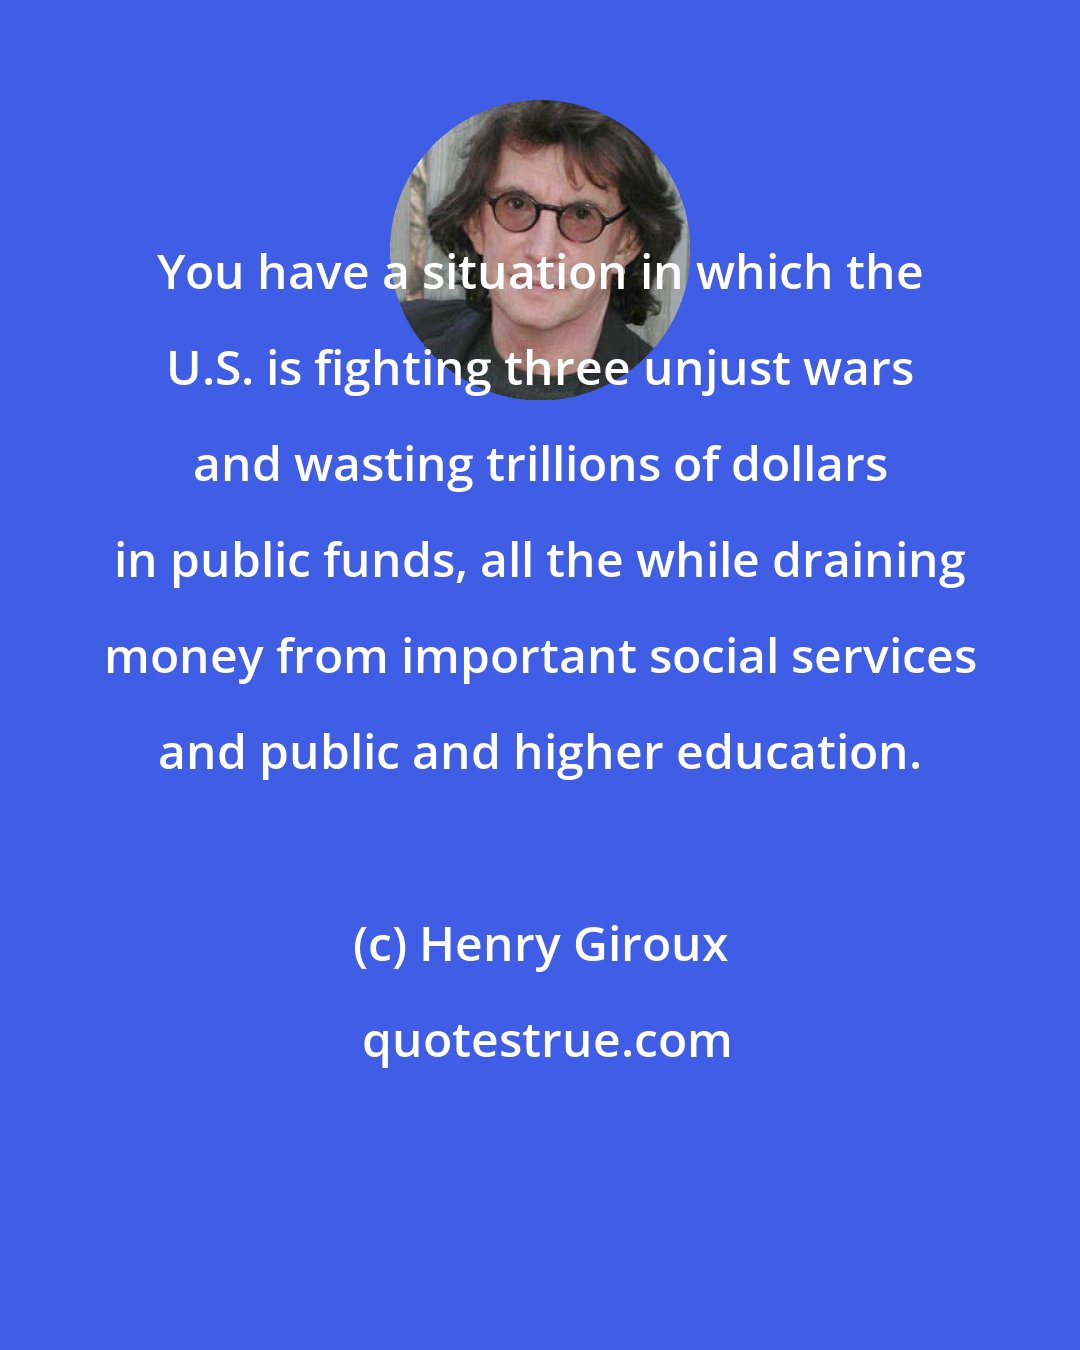 Henry Giroux: You have a situation in which the U.S. is fighting three unjust wars and wasting trillions of dollars in public funds, all the while draining money from important social services and public and higher education.